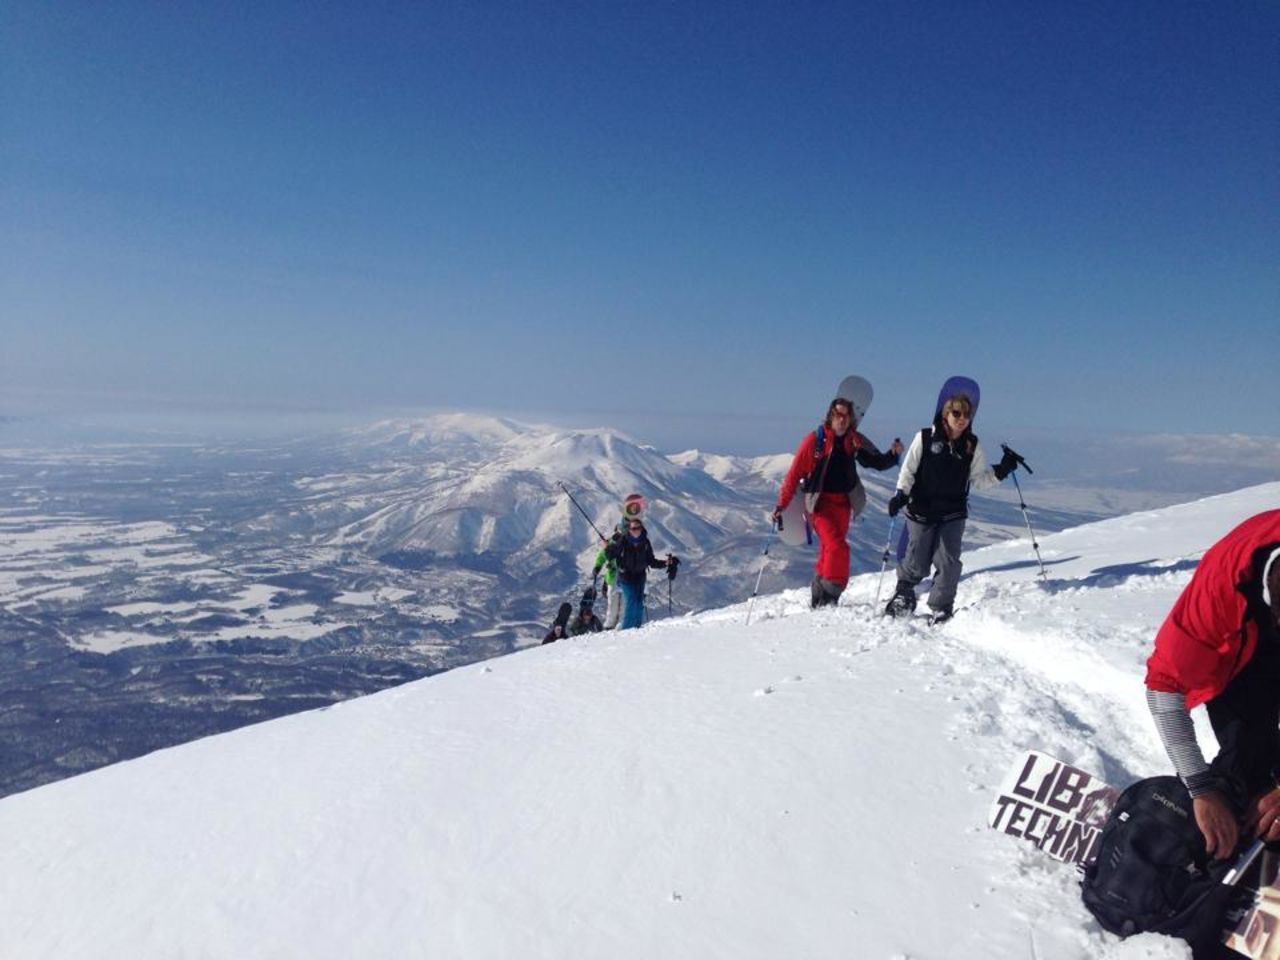 According to Sam Kerr of Niseko Xtreme Tours, climbing the volcano and skiing into its crater is the ultimate backcountry ski experience in the region. 